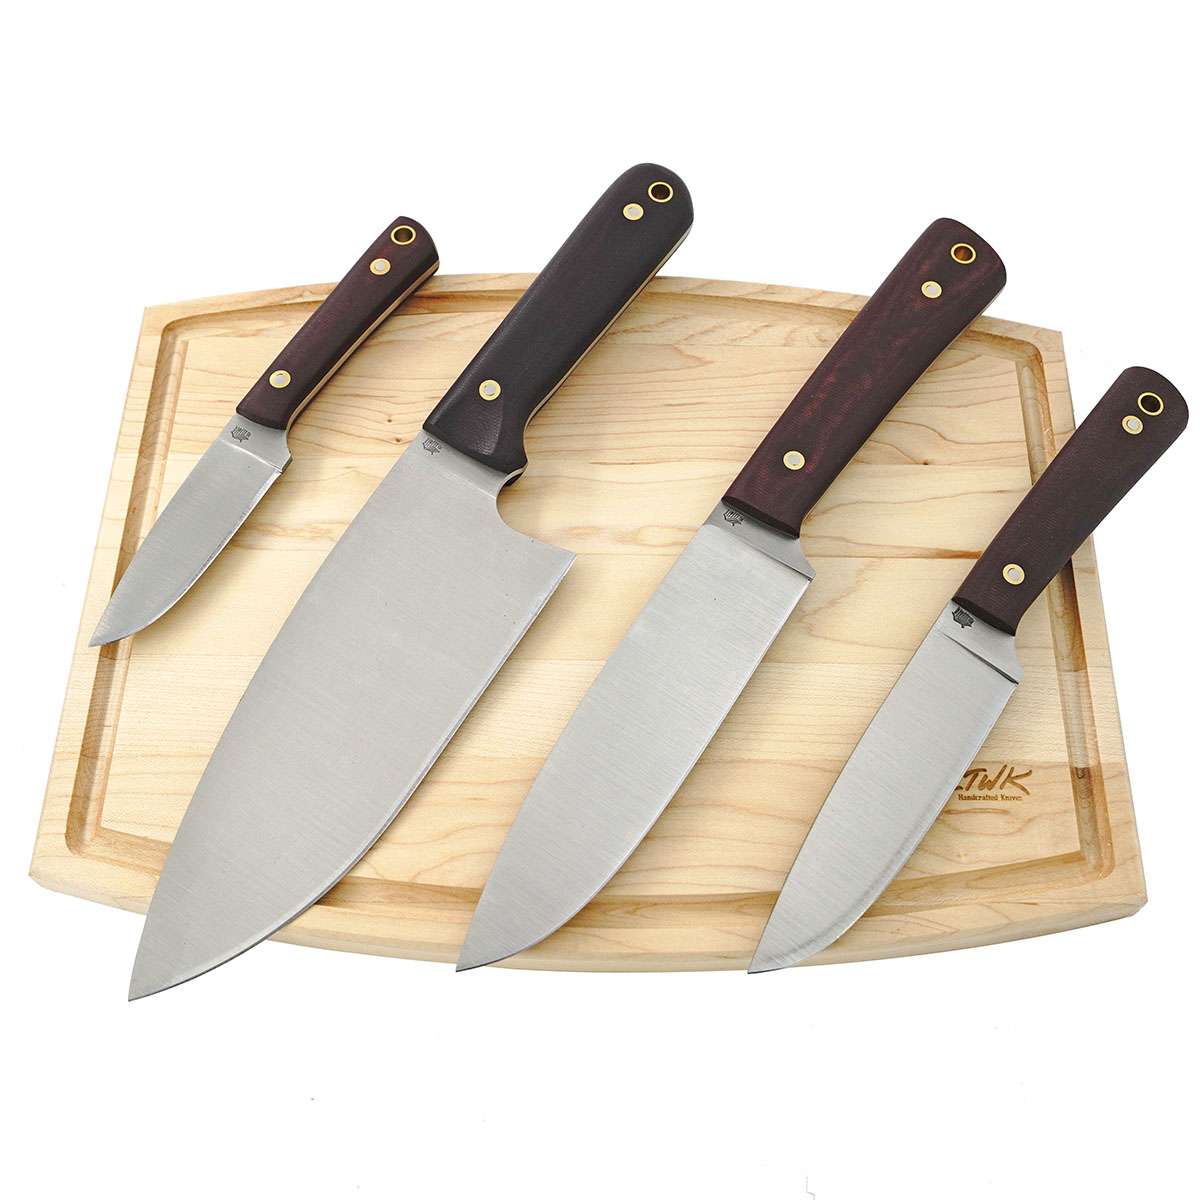 LT Wright Cookcraft Collection 4 Piece Knife Set - Red